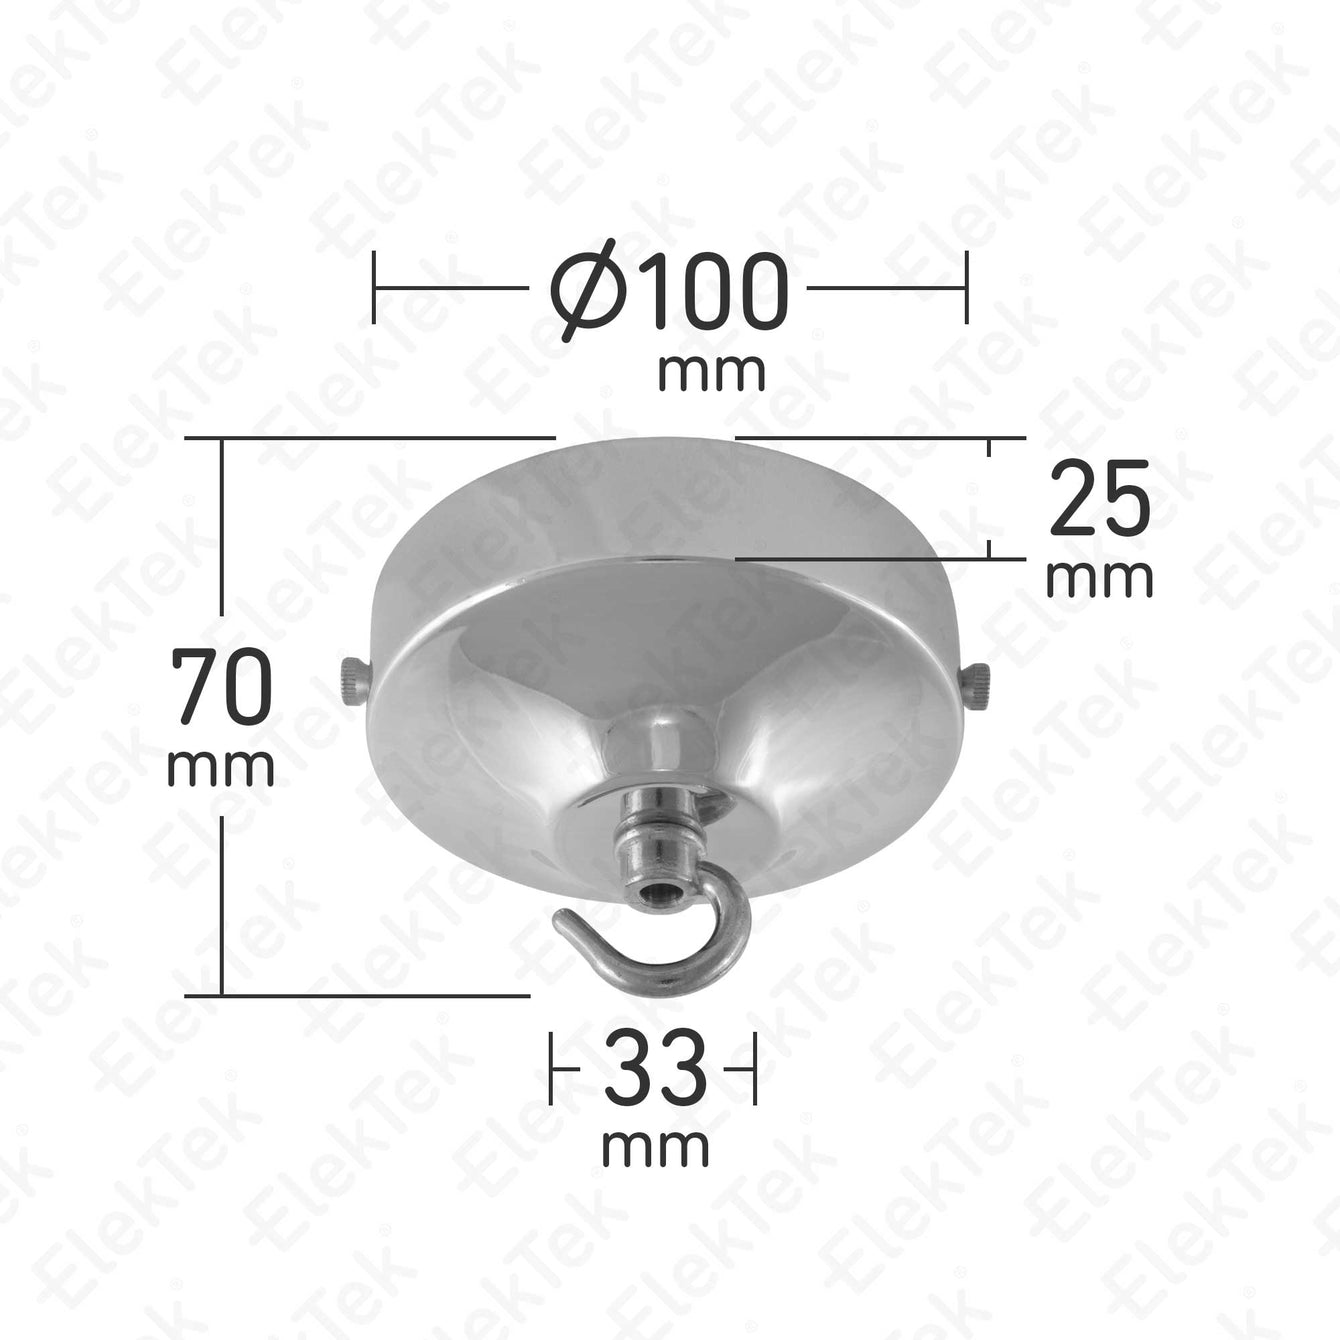 ElekTek 100mm Diameter Convex Ceiling Rose with Strap Bracket and Hook Metallic and Powder Coated Finishes Chrome